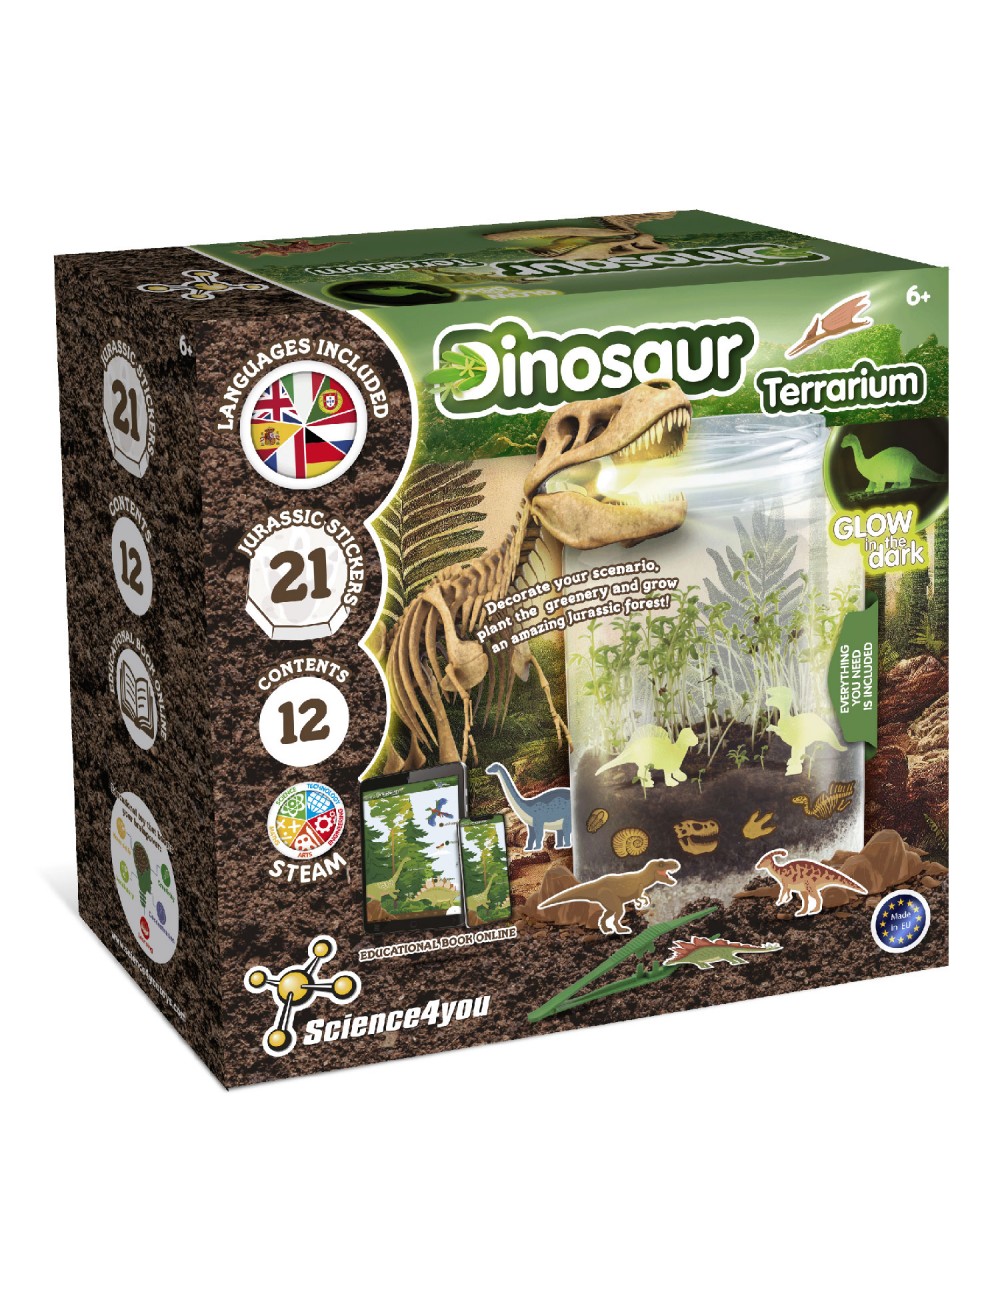 AluAbi Light Up Terrarium Kit for Kids, Glow in Dark Dinosaur Toys, Science  Activities for Ages 5-8+, Kids Crafts Ages 4-8, Birthday Gift for Boys